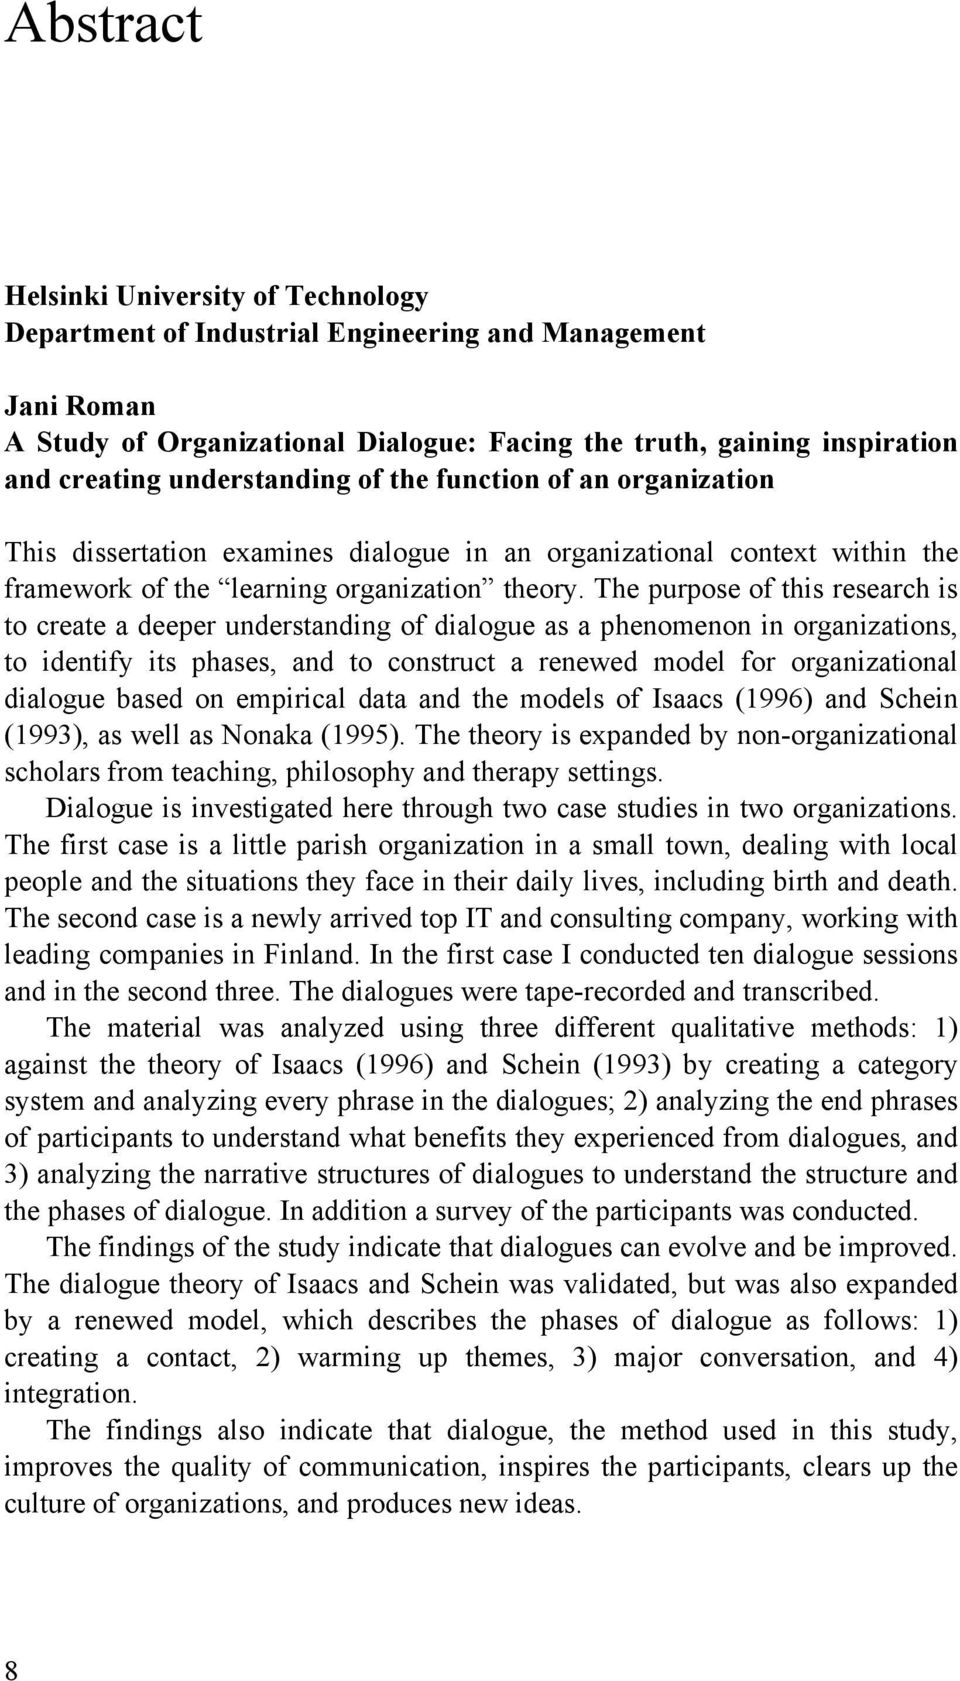 The purpose of this research is to create a deeper understanding of dialogue as a phenomenon in organizations, to identify its phases, and to construct a renewed model for organizational dialogue